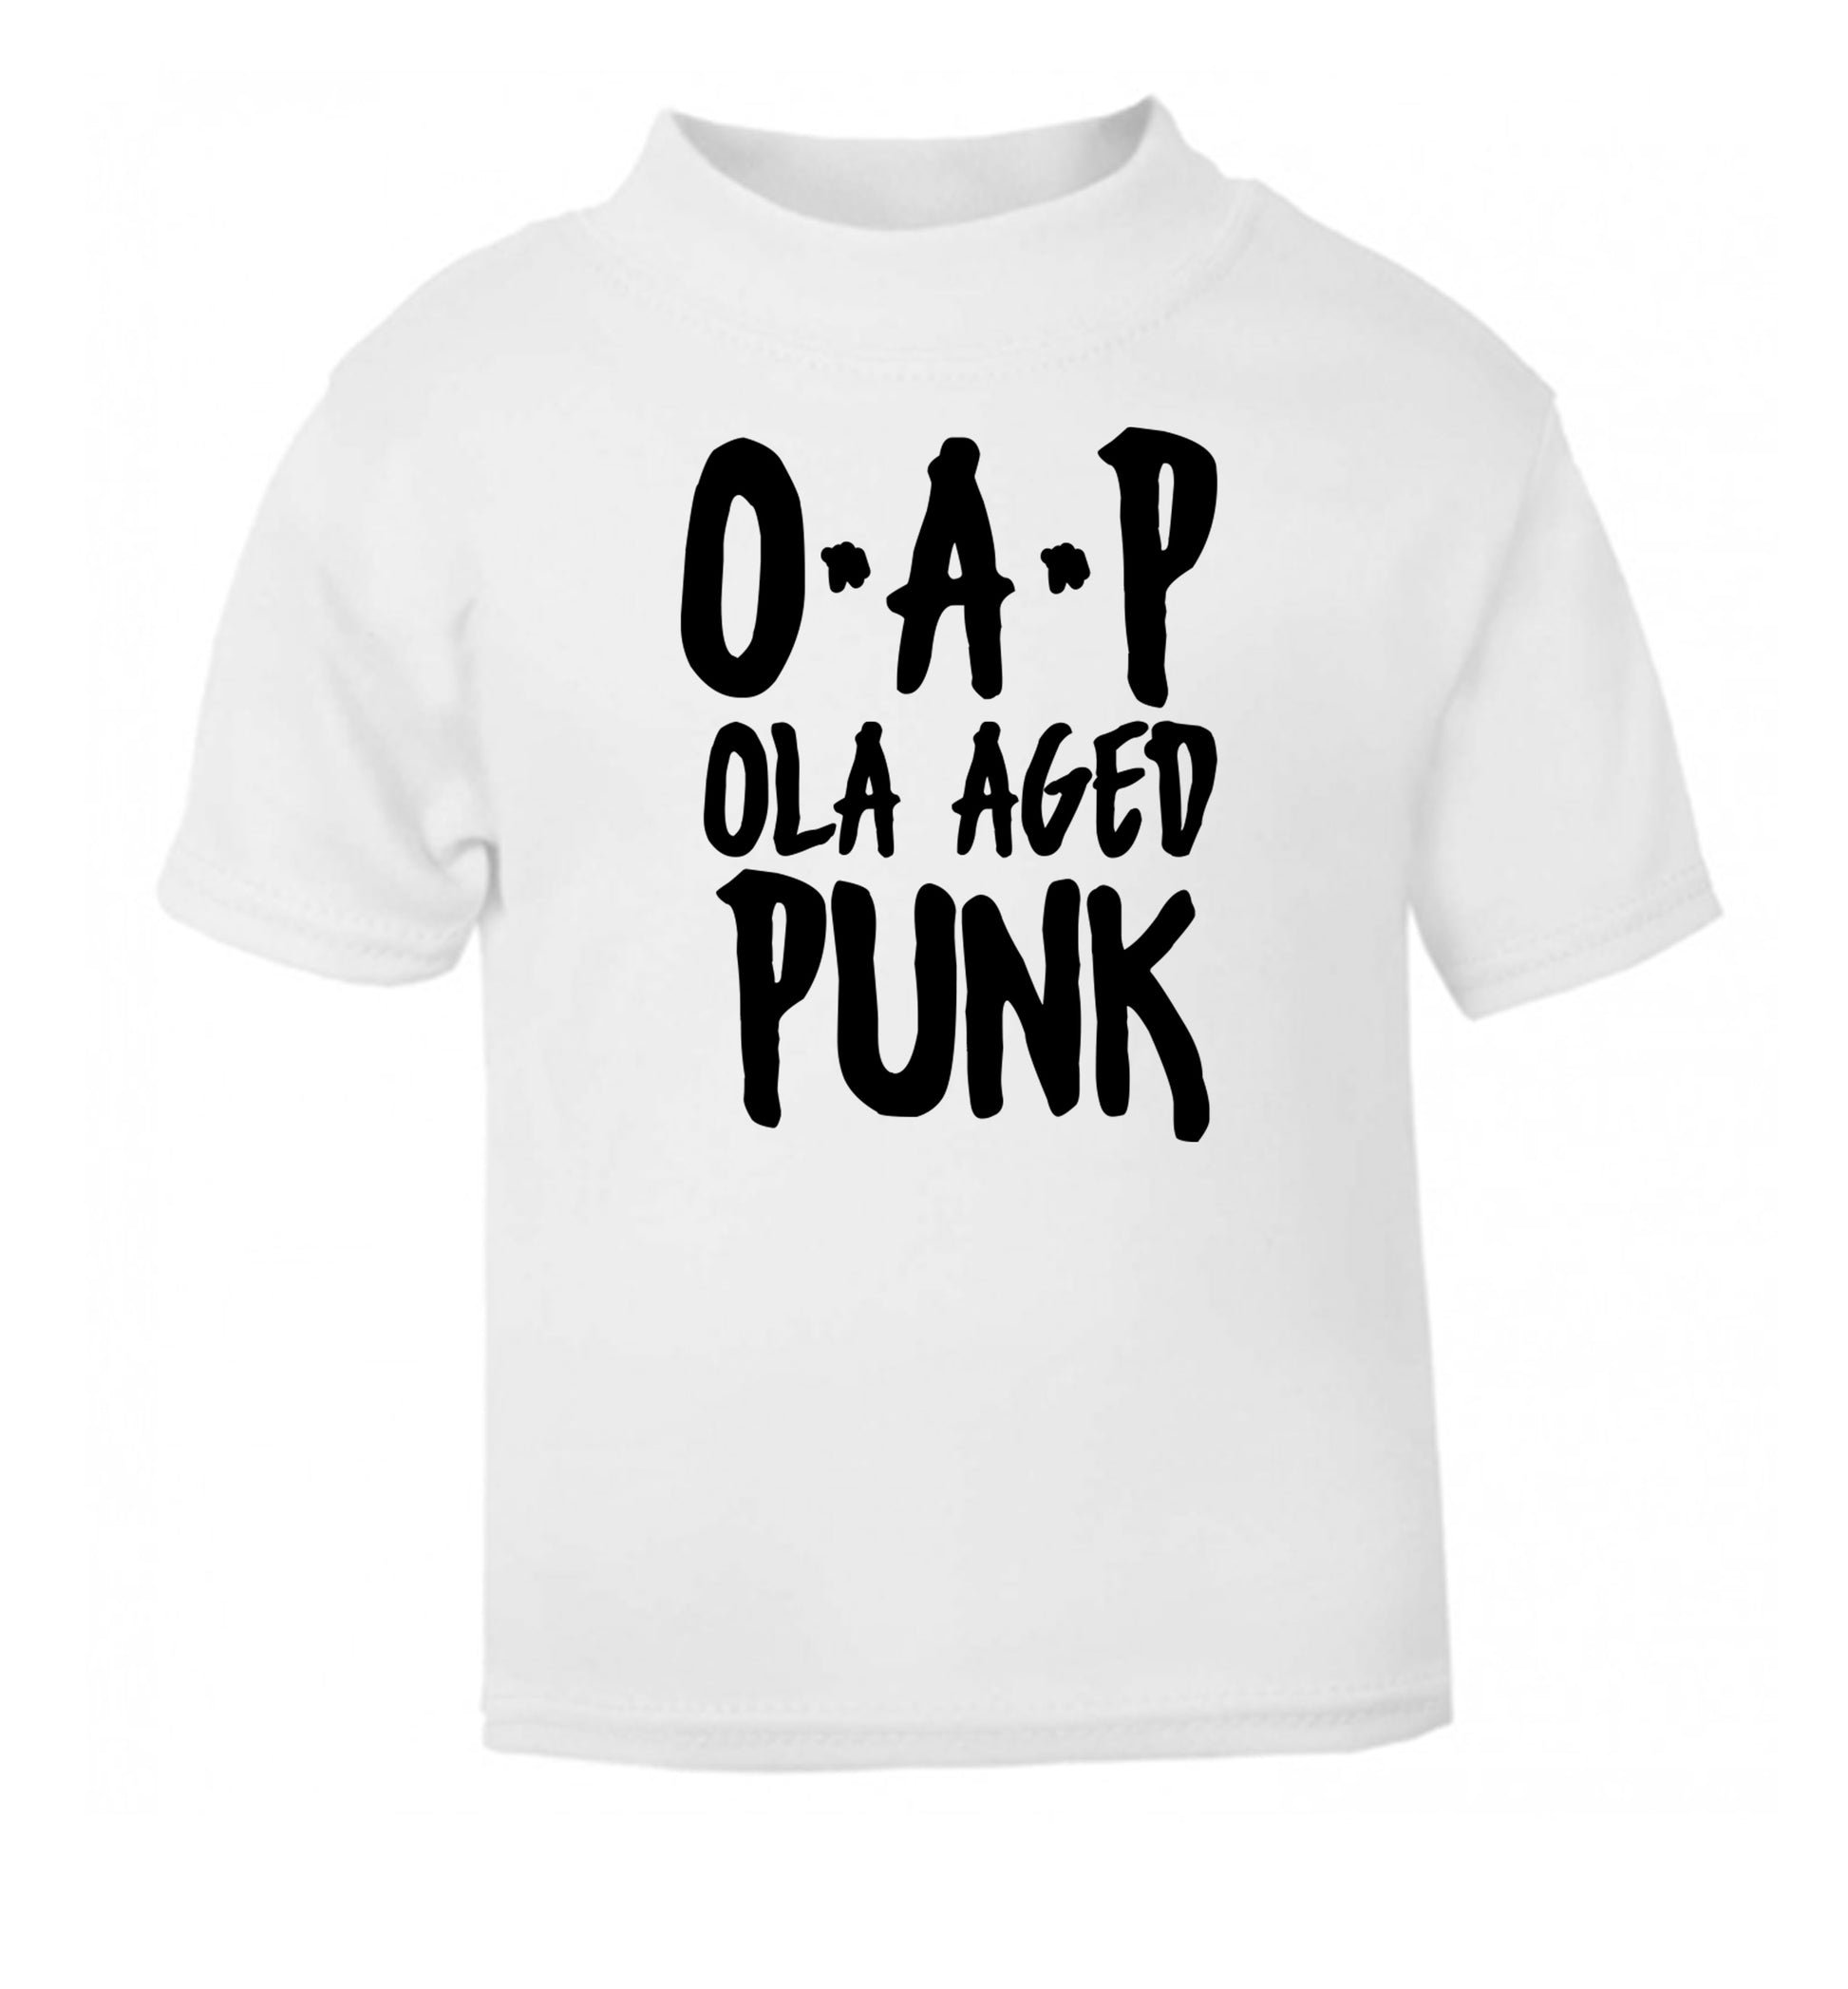 O.A.P Old Aged Punk white Baby Toddler Tshirt 2 Years